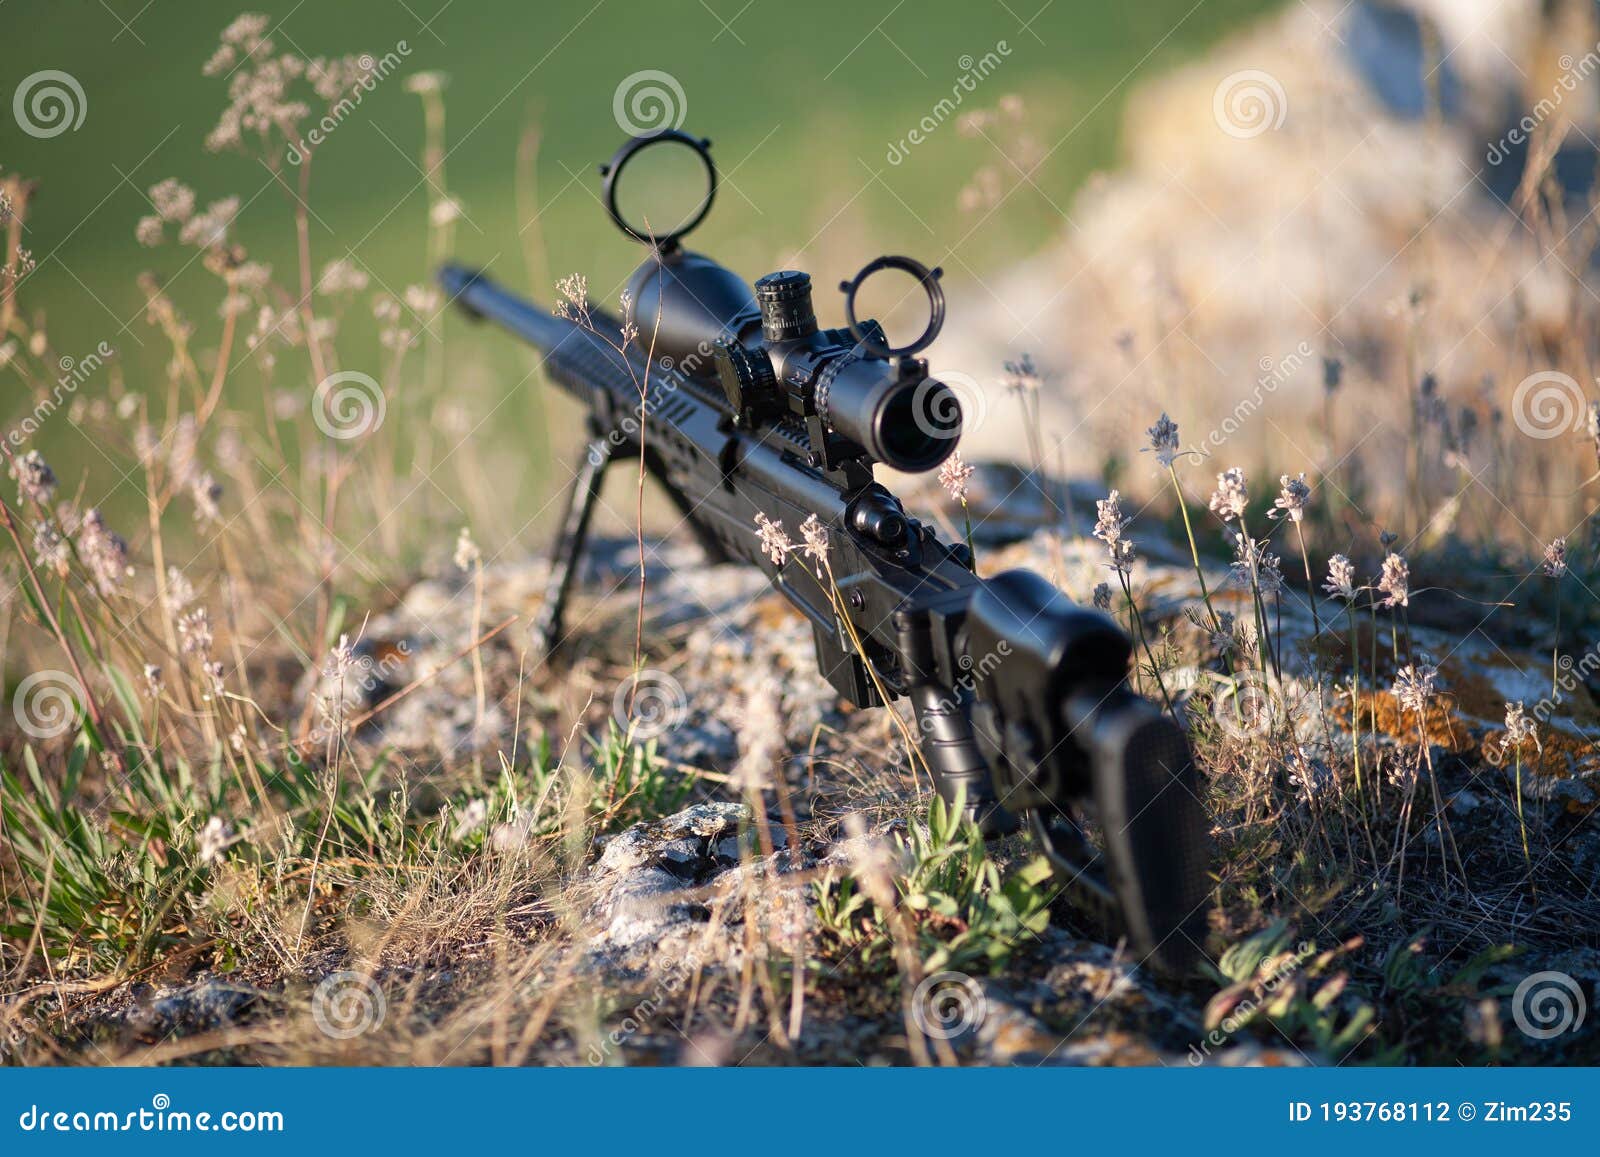 sniper rifle with bipod on combat position